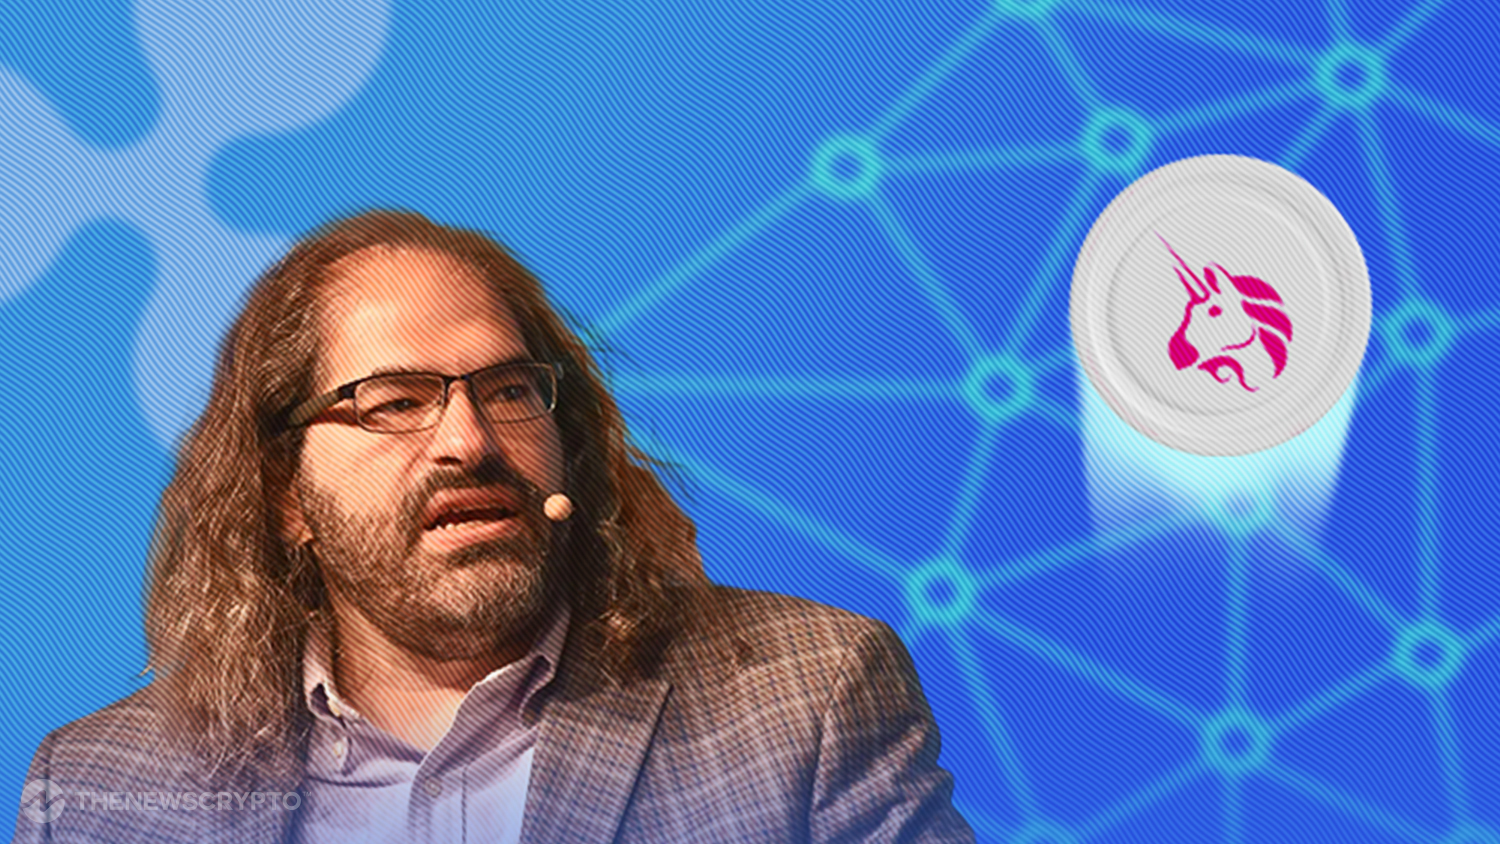 'Uniswap is Not Decentralized', Ripple CTO Claims